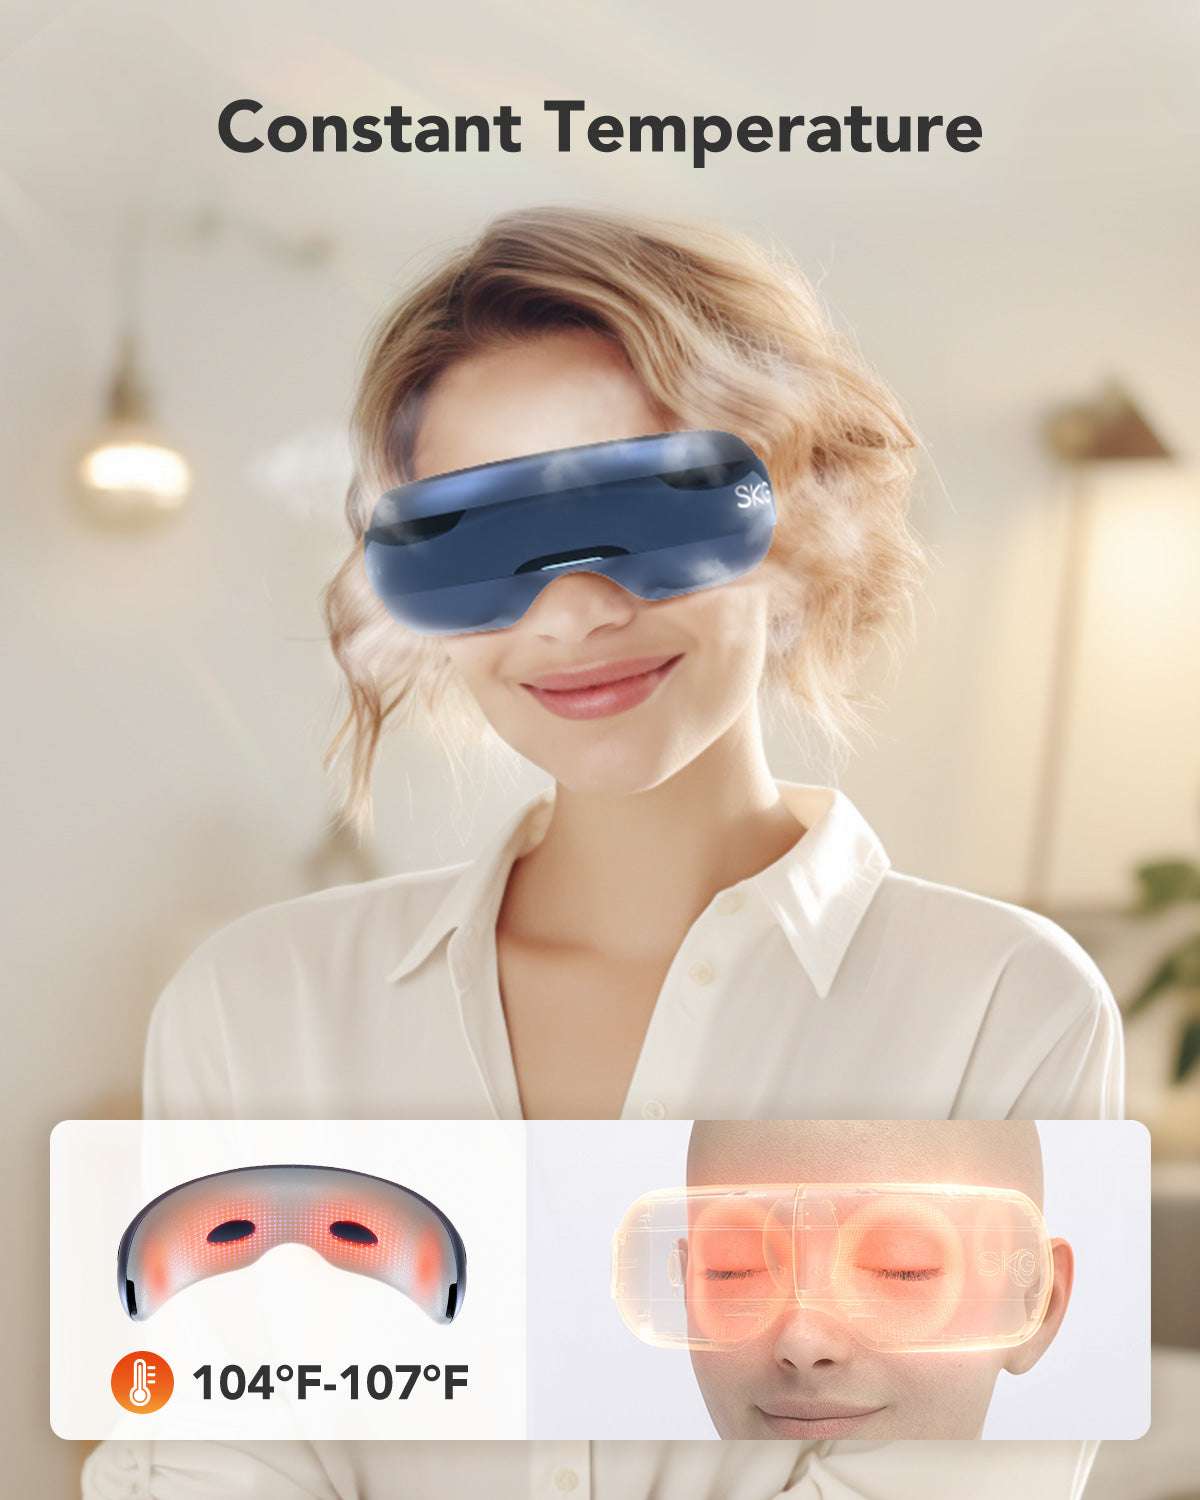 SKG E3 Pro Eye Massager with Vision Window